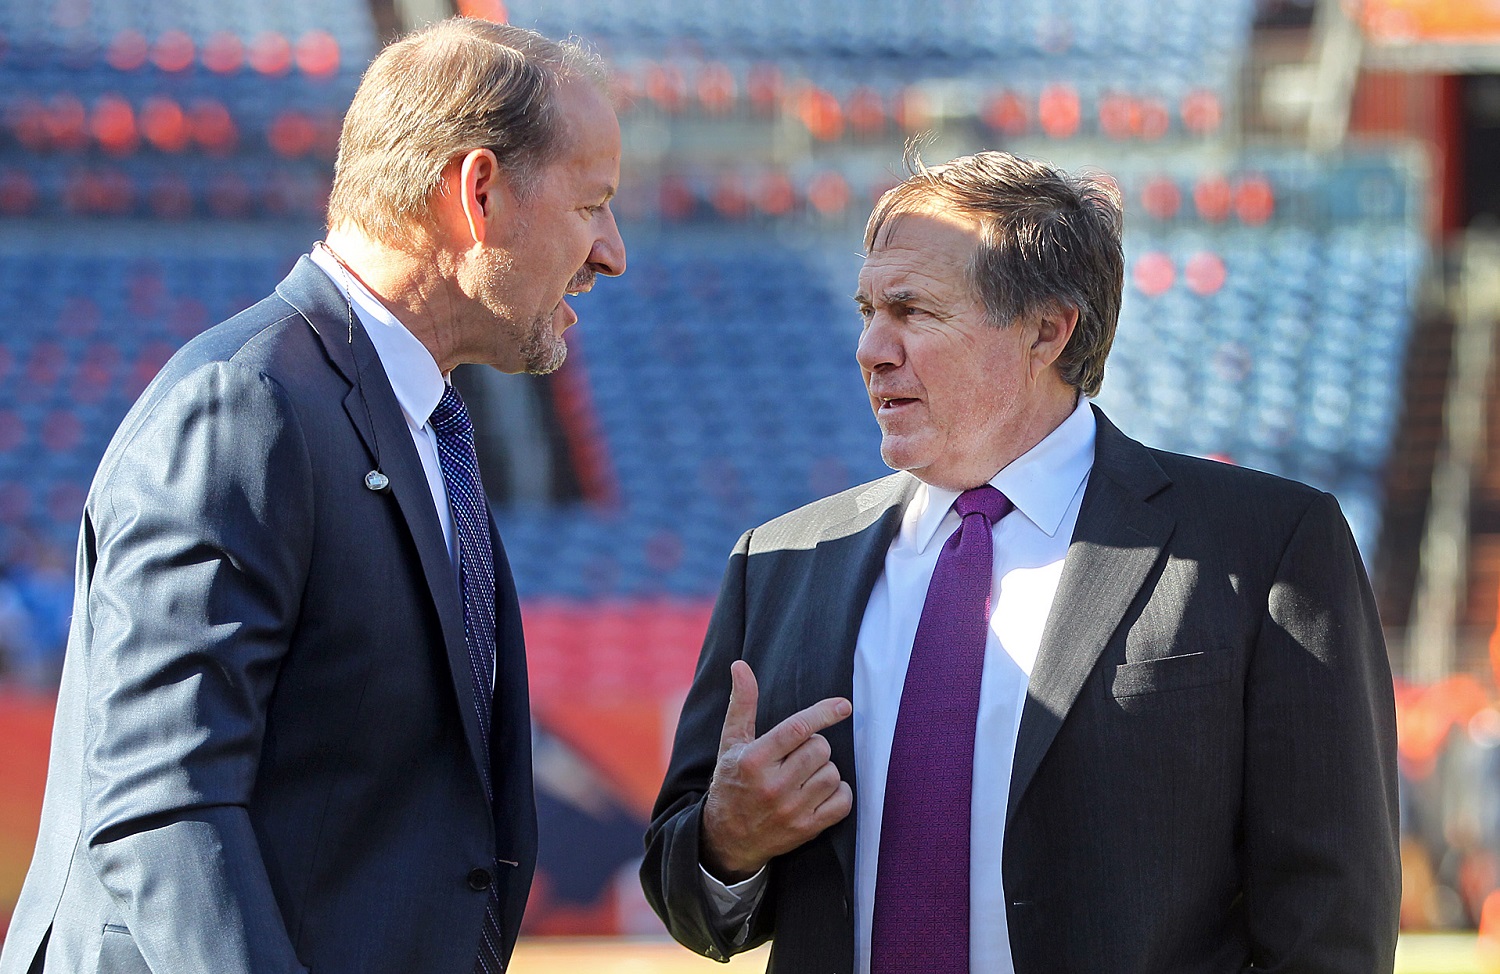 Former Pittsburgh Steelers head coach Bill Cowher talks with New England Patriots head coach Bill Belichick before the AFC championship game in Denver on ,Jan. 24, 2016.